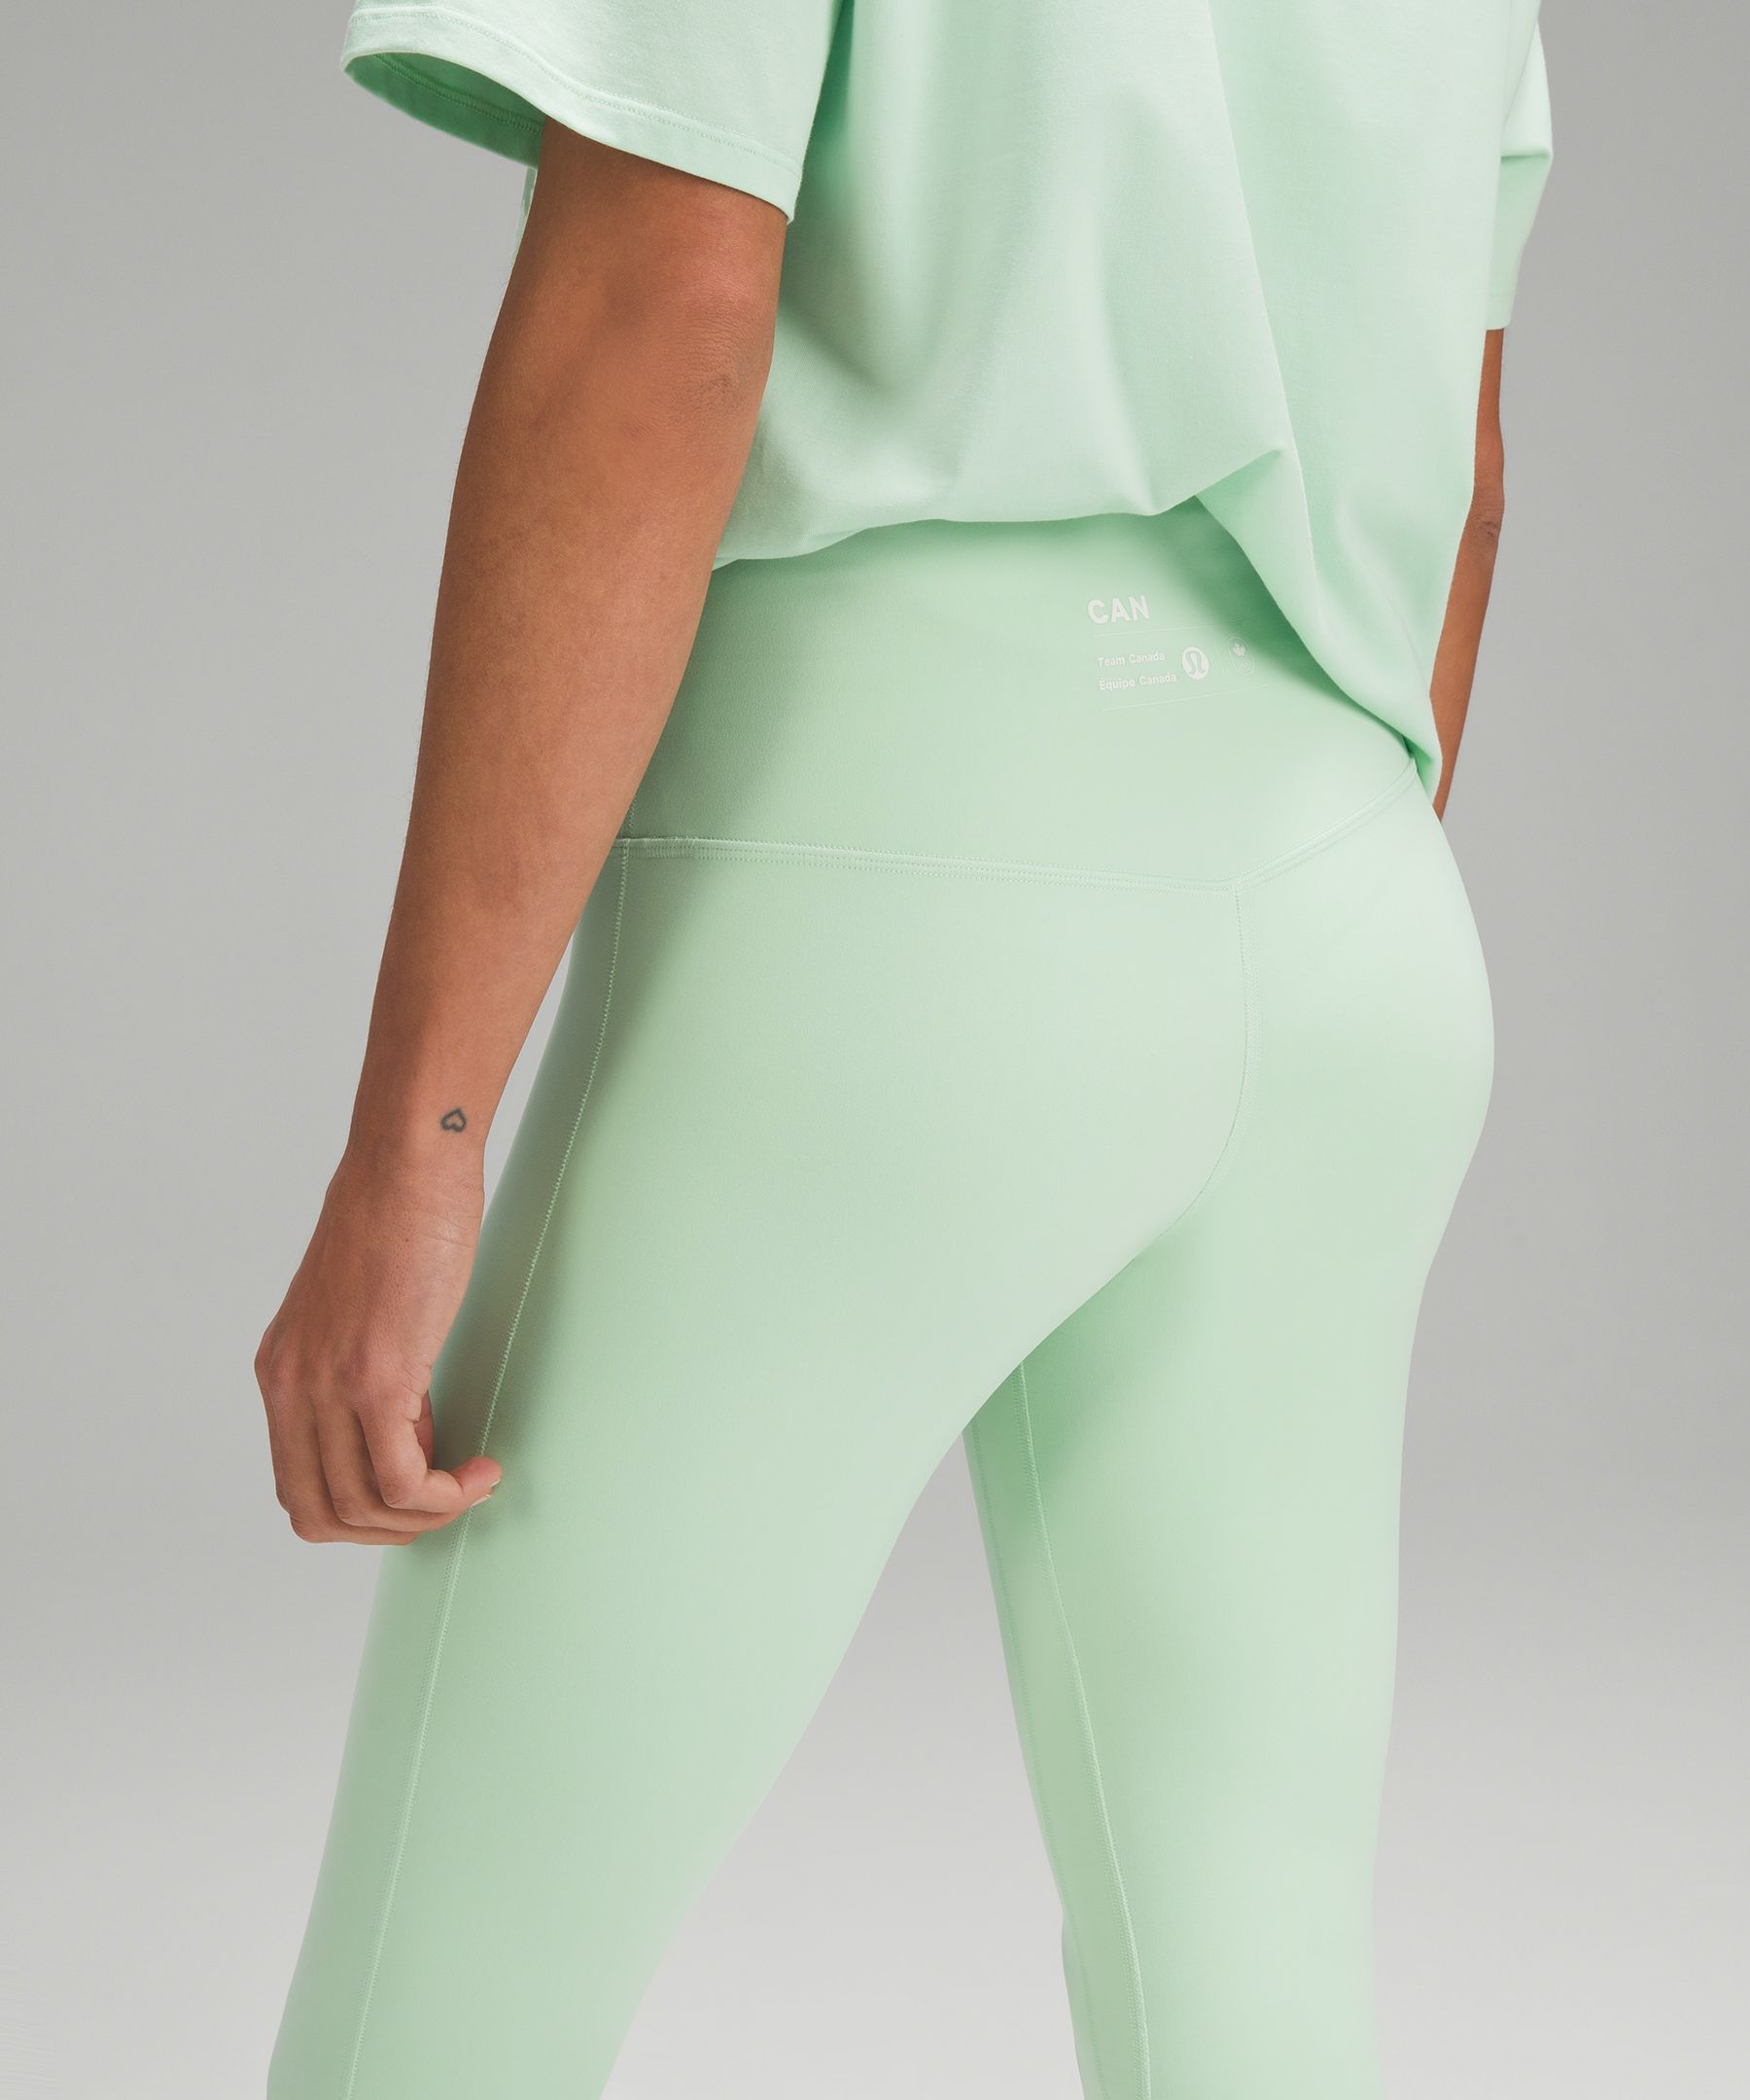 Lululemon Align High-Rise Pants 25” - Size 8 - $72 New With Tags - From Gel